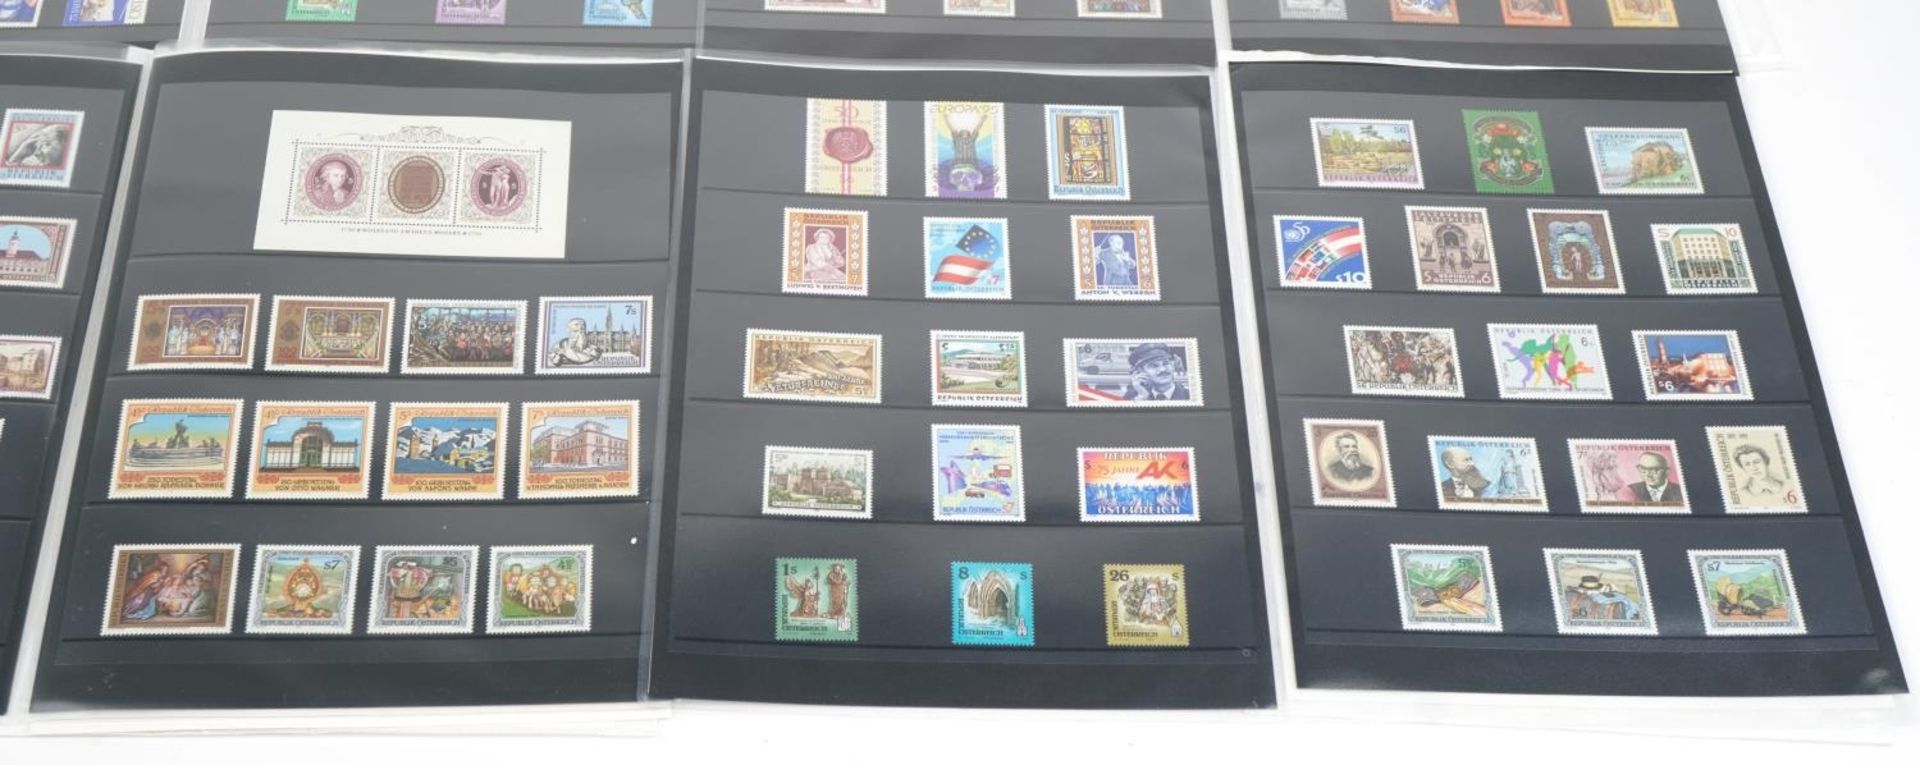 Six Austrian year packs with unmounted stamps, 1990-1995, face value £481.60 : For further - Image 5 of 6